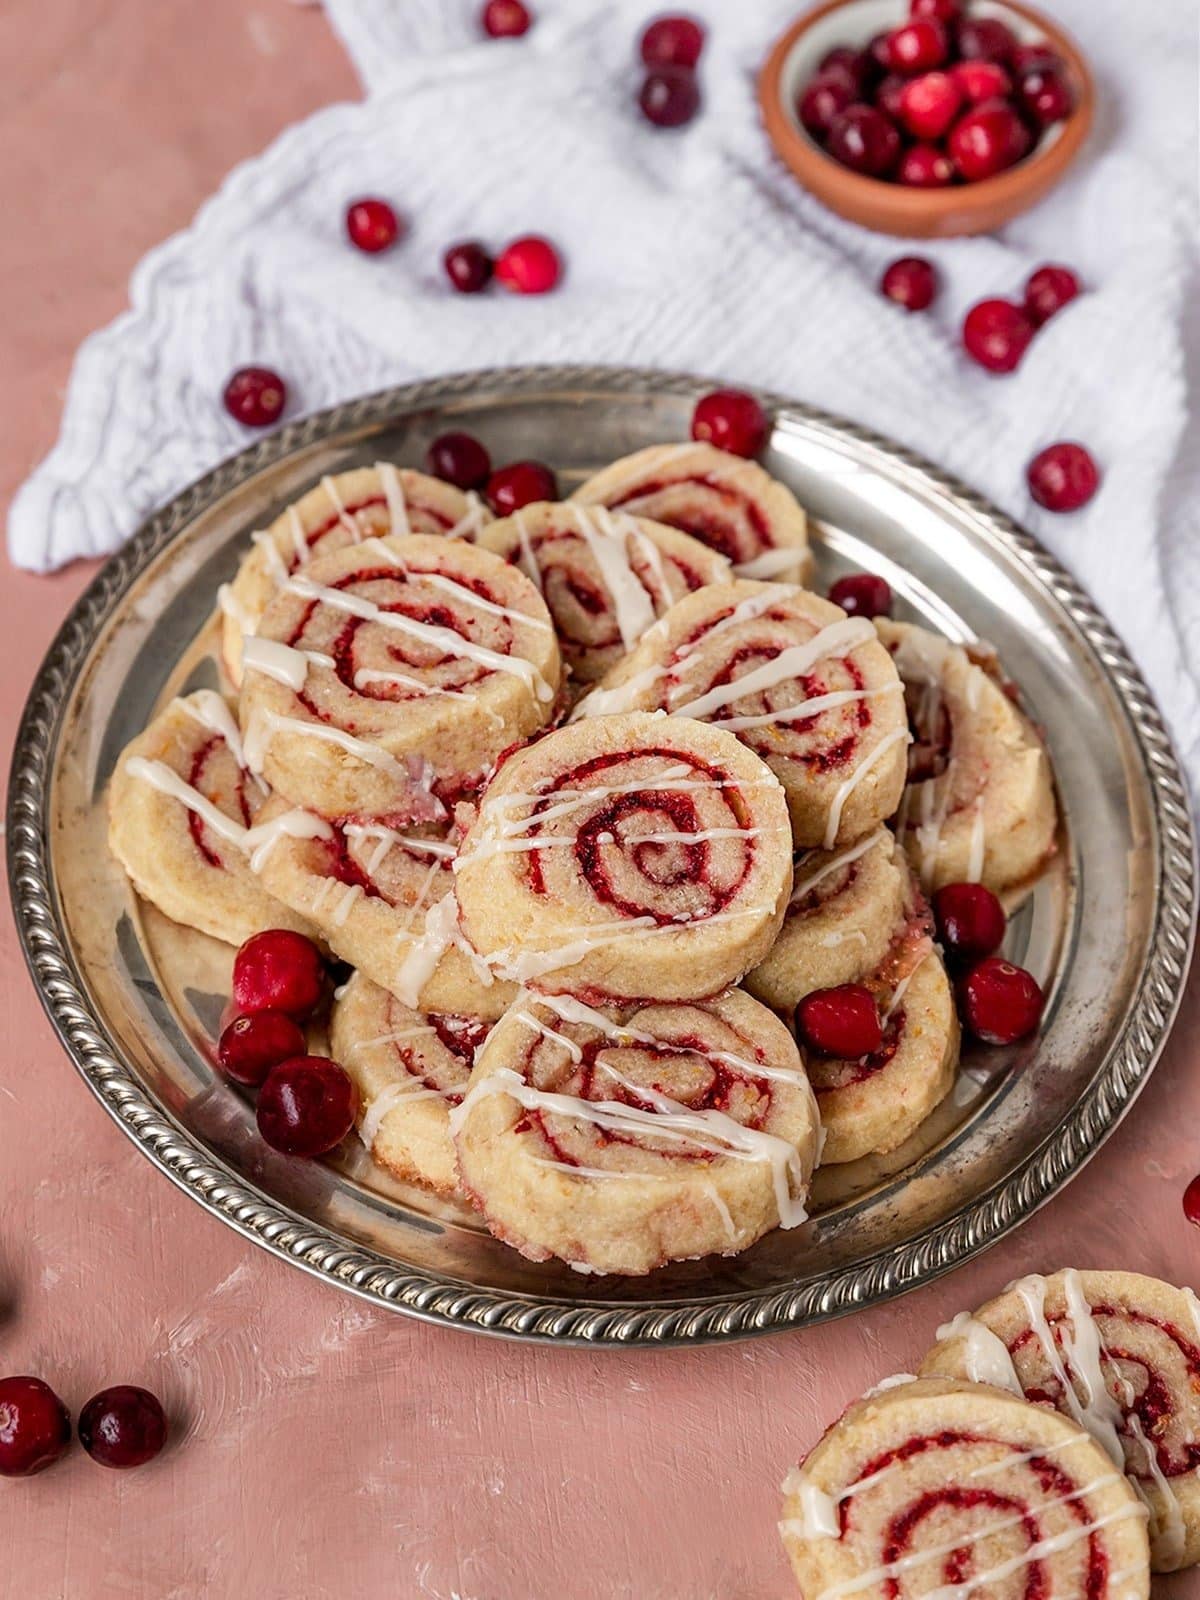 Bunch of pinwheel cookies with cranberry filling on a plate drizzled with white chocolate syrup.